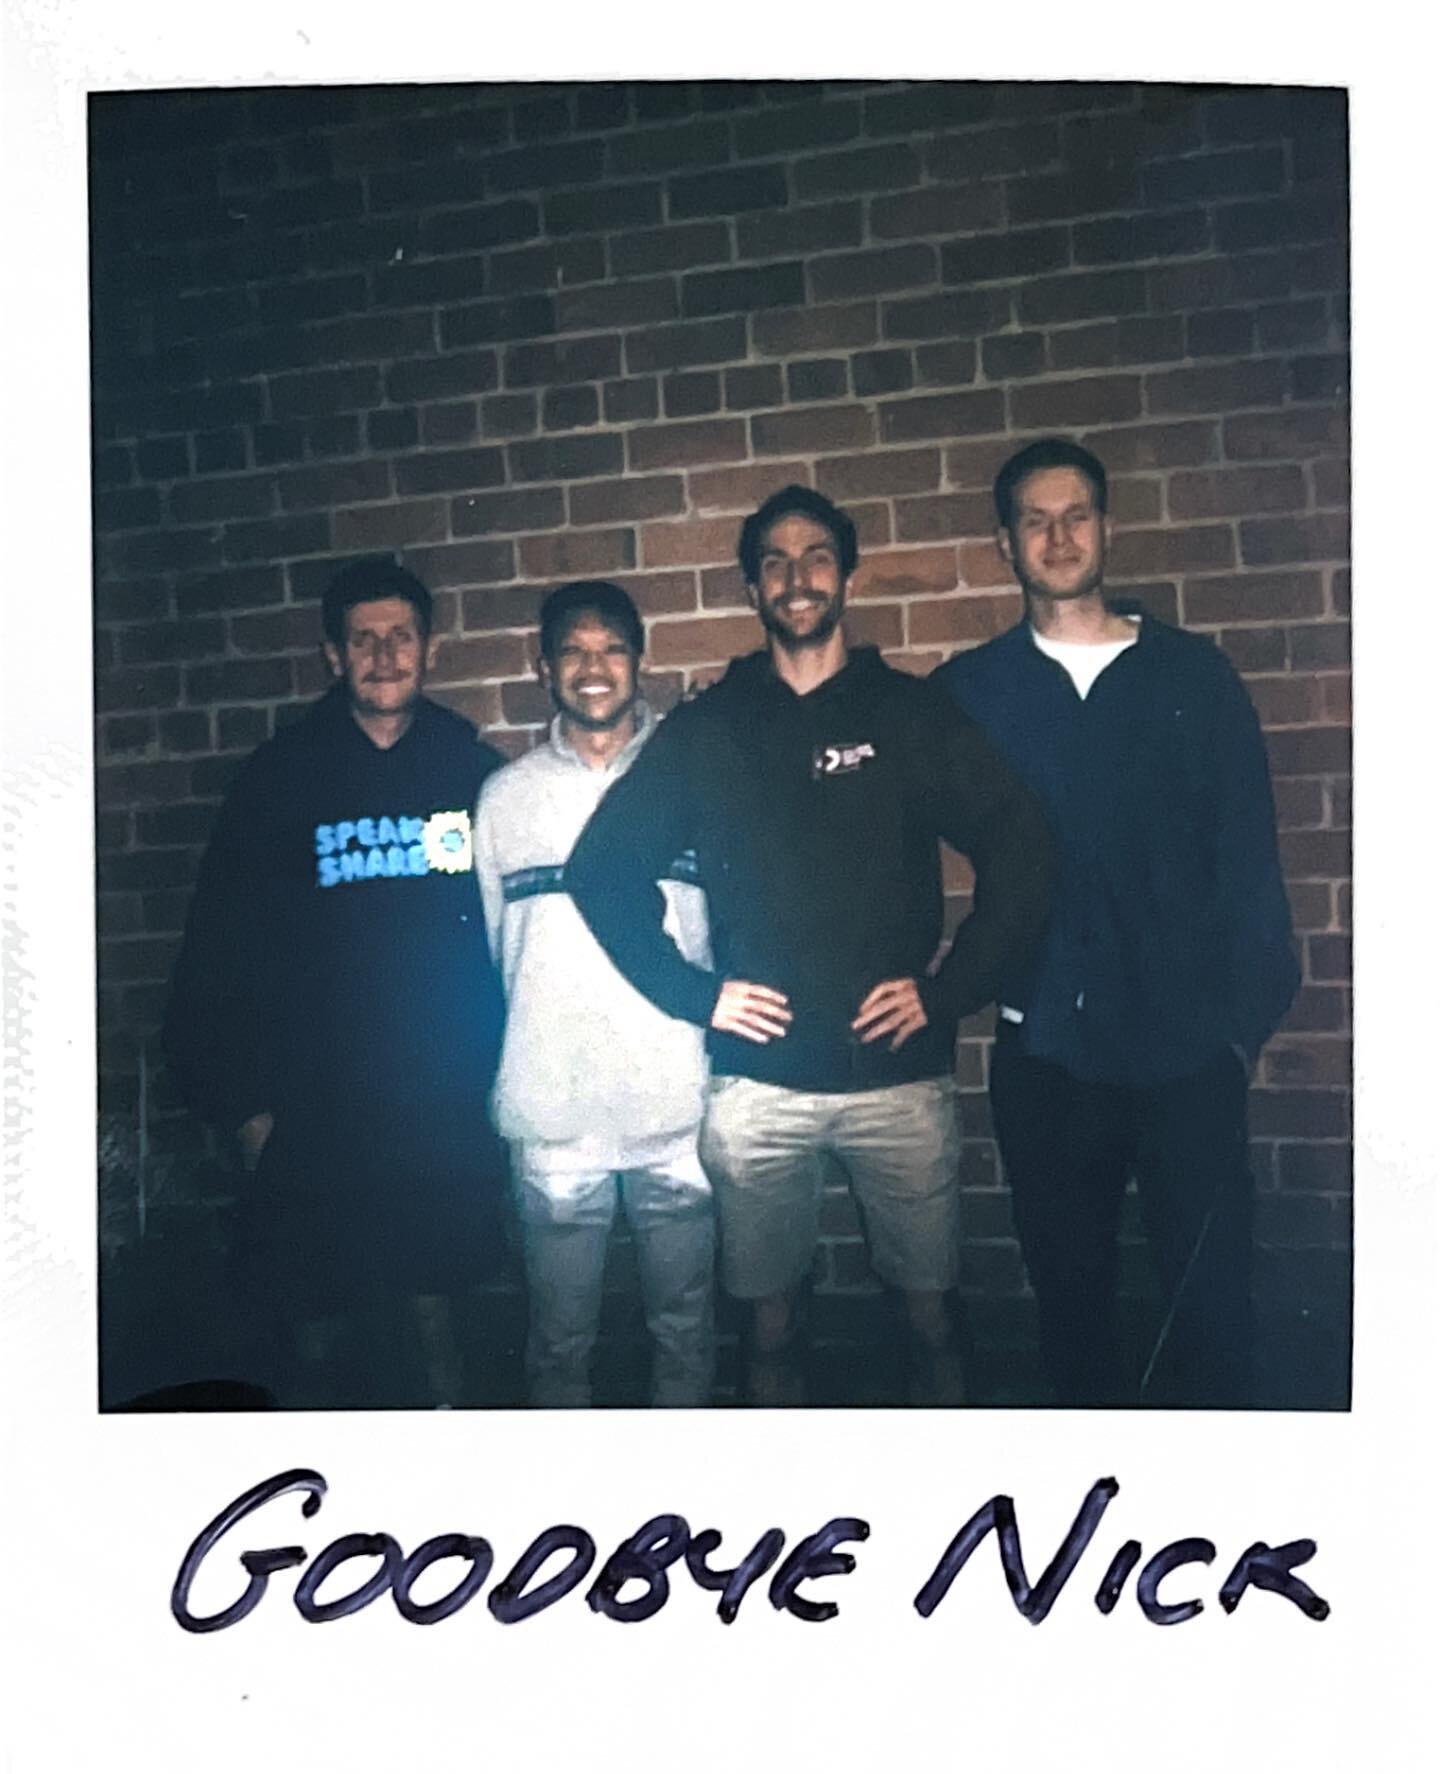 A special goodbye to a special man @denks_ 😢💙

We say &lsquo;Goodbye Nick&rsquo; on the latest episode of The ZOOP Podcast 🎙️🎧

Give it a listen wherever you get your podcasts from and send some love to the great man below ⬇️⬇️⬇️